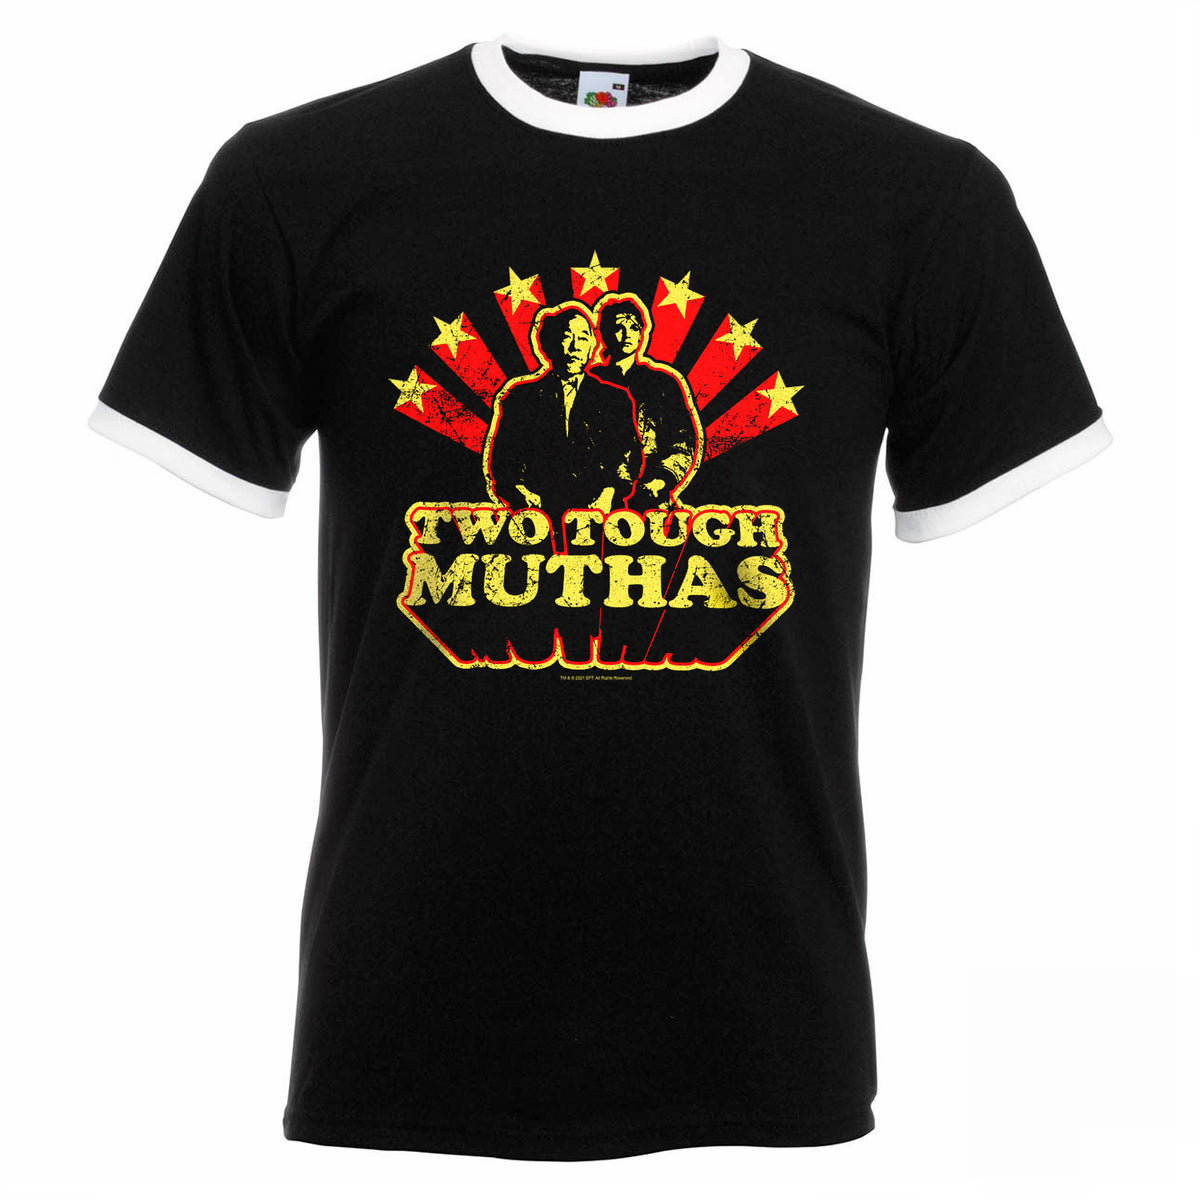 Two Tough Muthas Black Ringer Tee